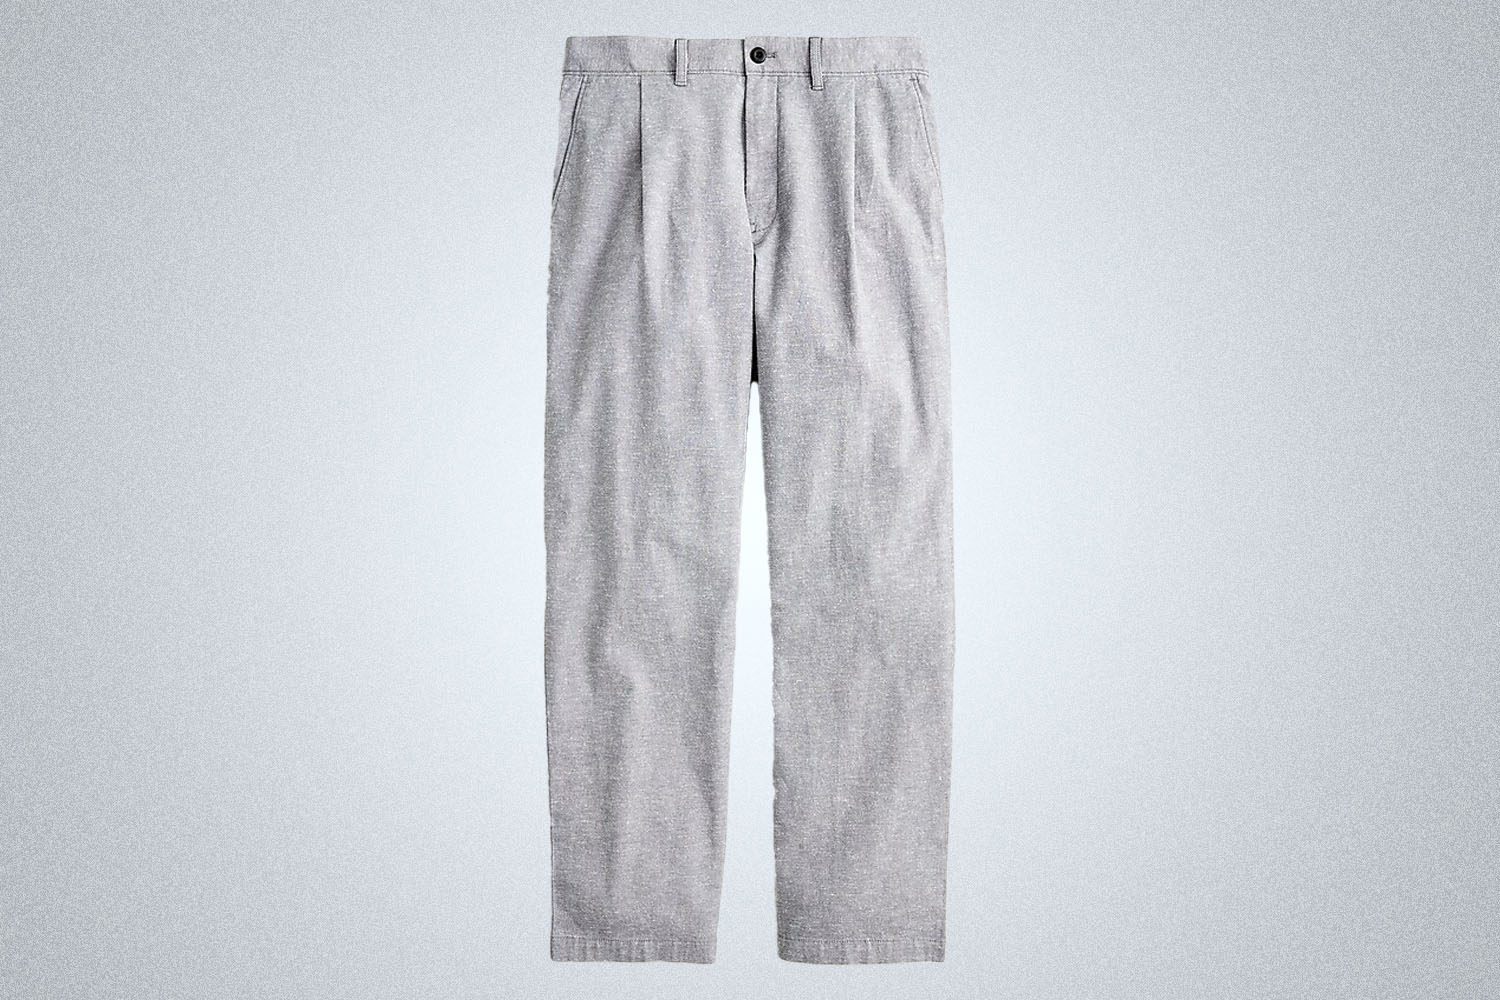 A pair of pleated grey linen pants from J.Crew on a grey background